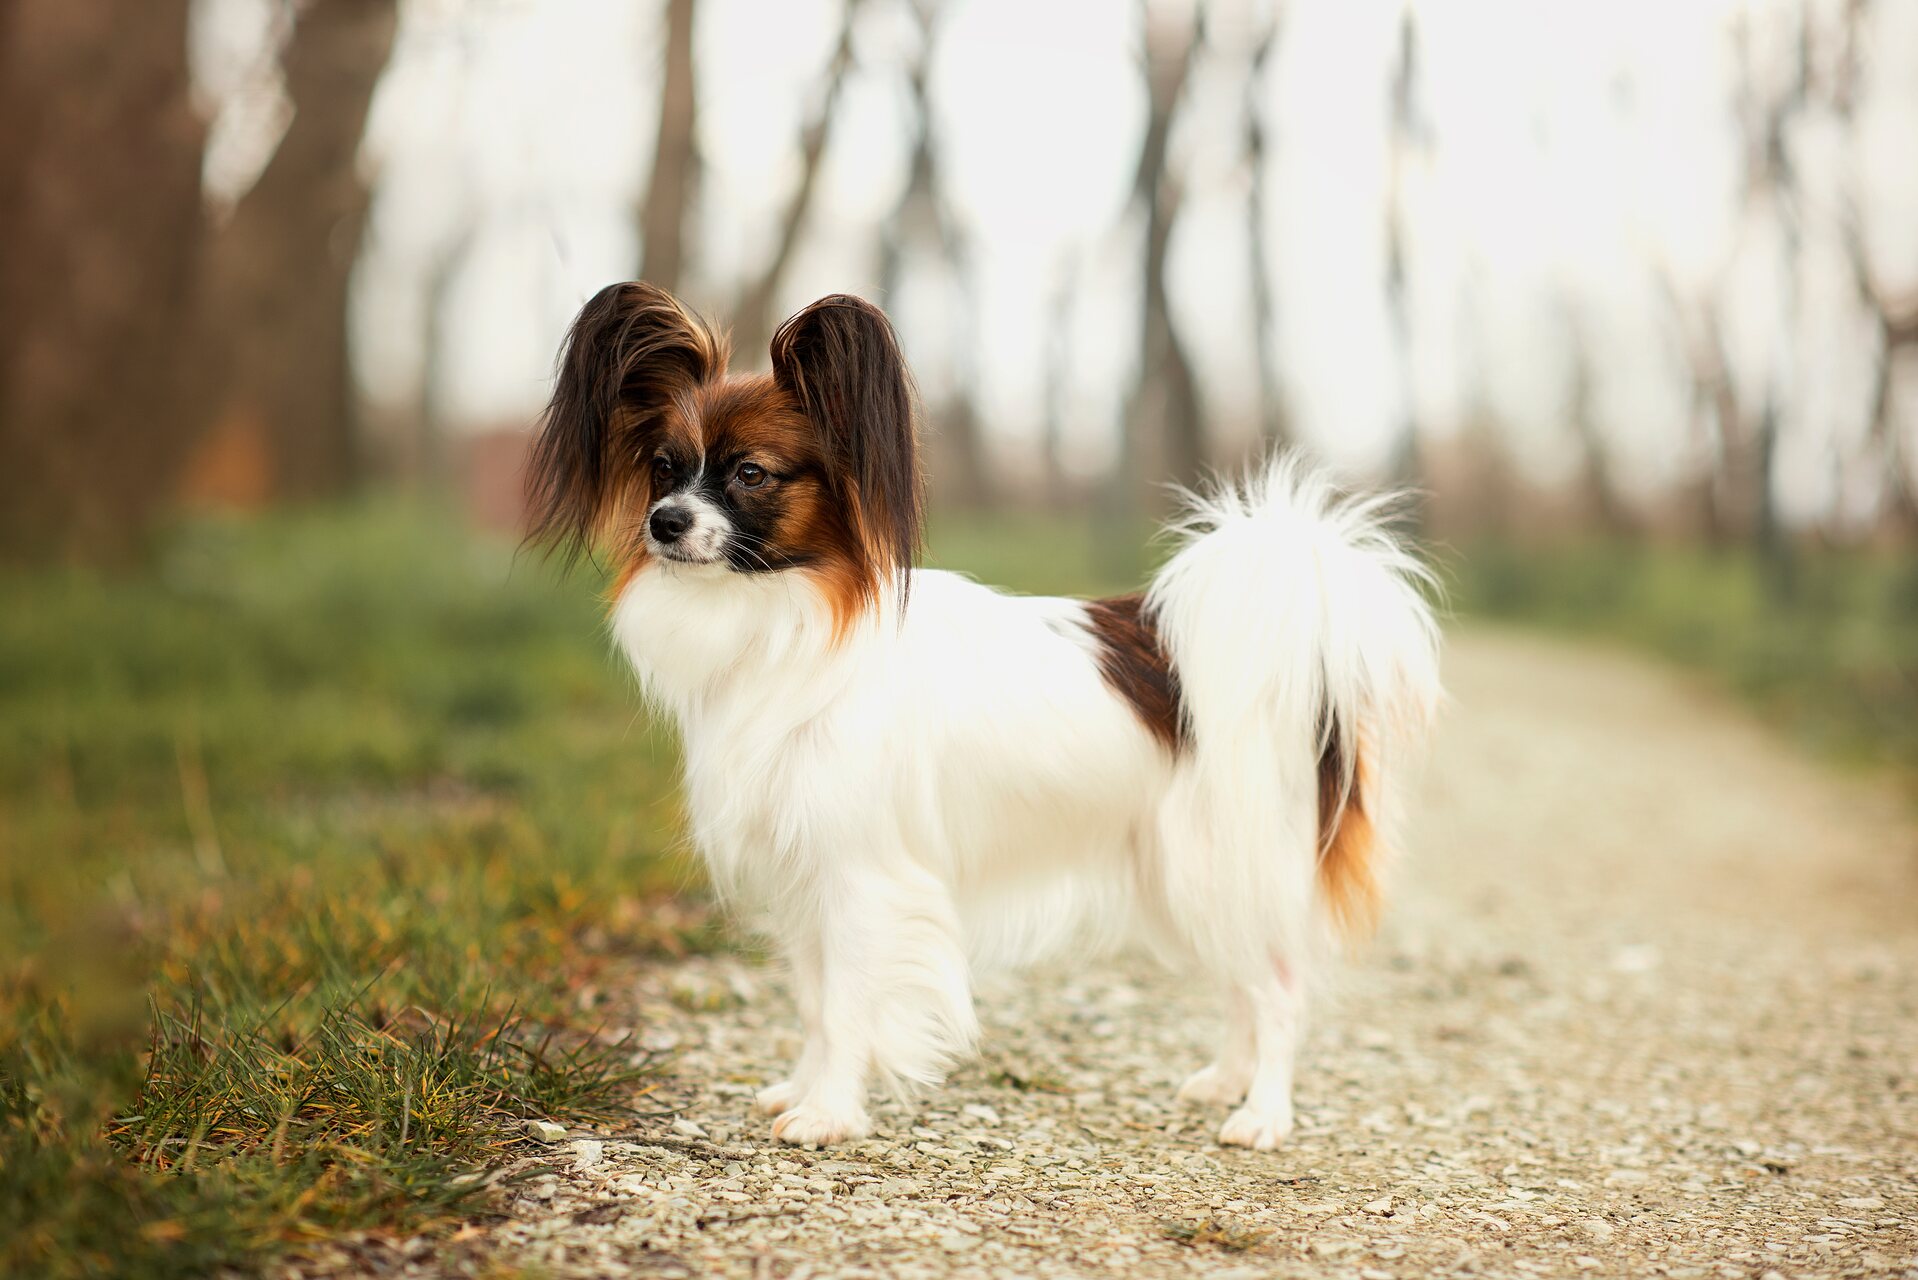 A Papillon dog in a forest